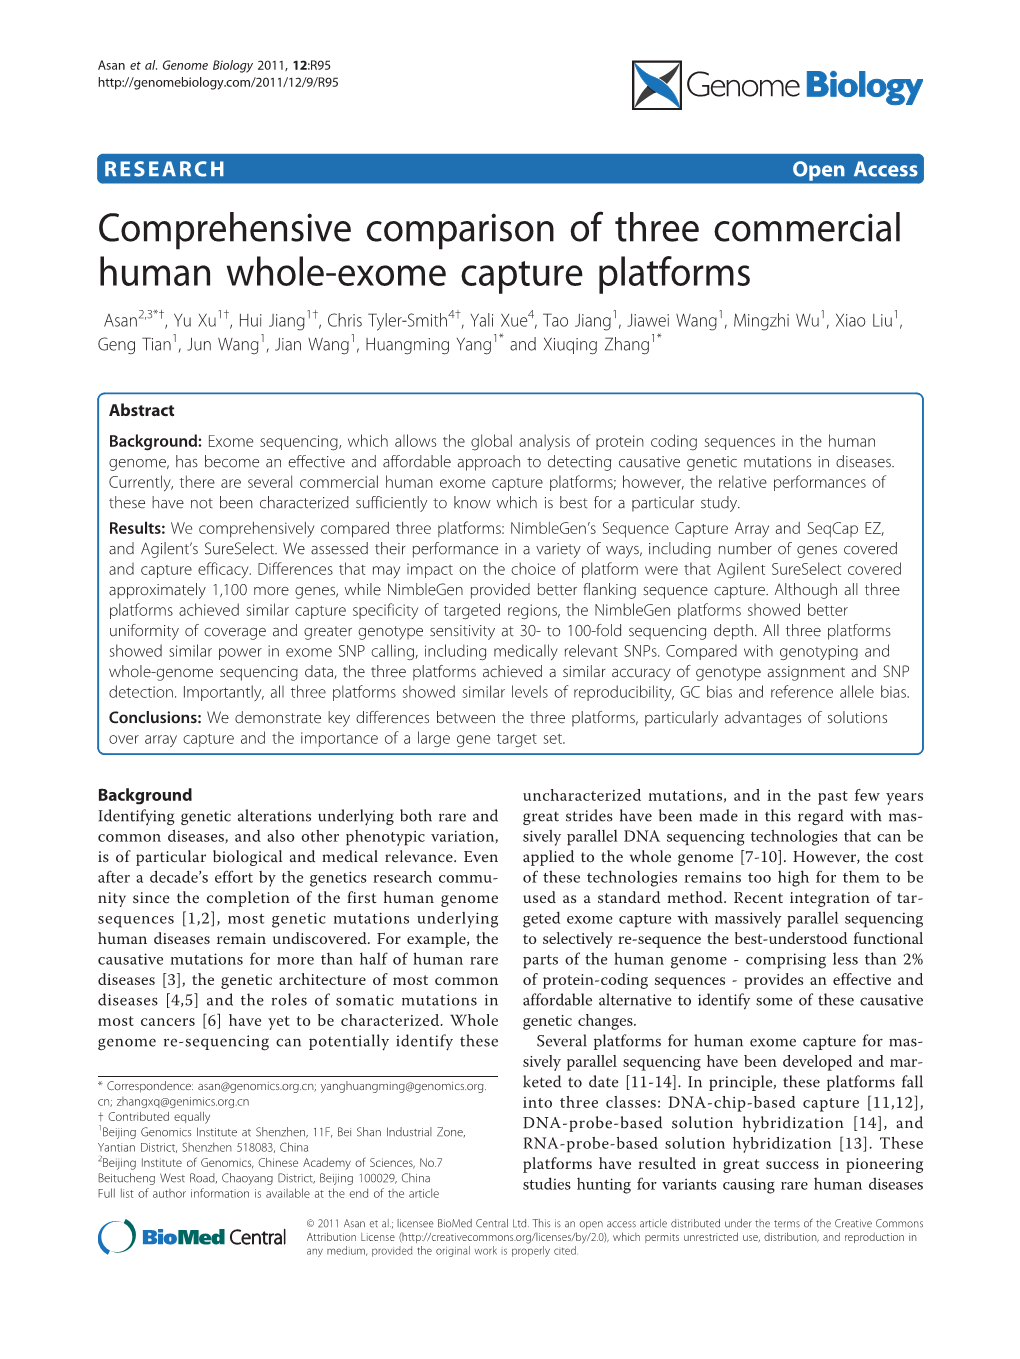 Comprehensive Comparison of Three Commercial Human Whole-Exome